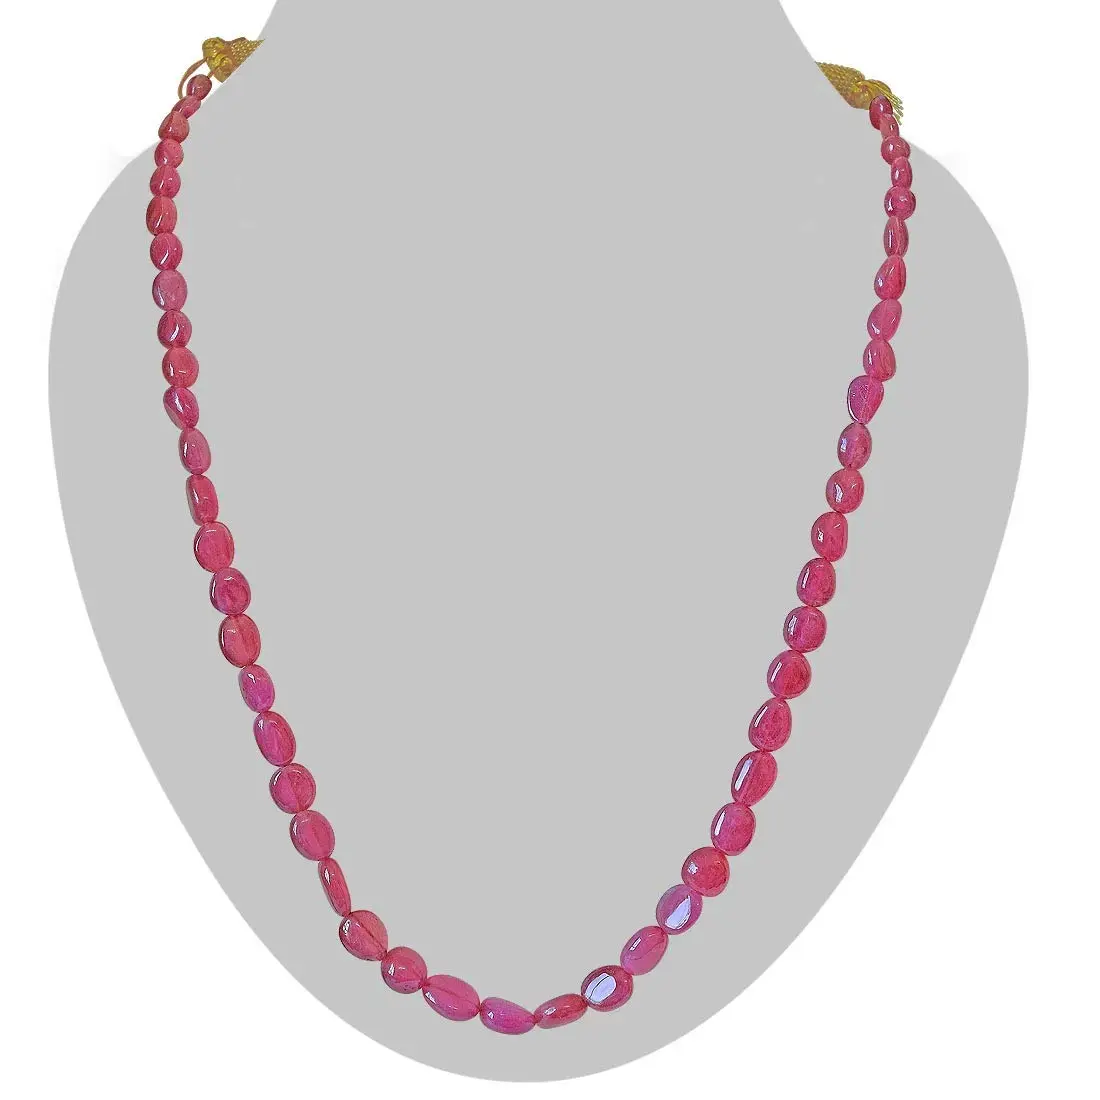 201.69cts Single Line Real Light Red Oval Ruby Beads Necklace for Women (201.69cts Ruby Neck)